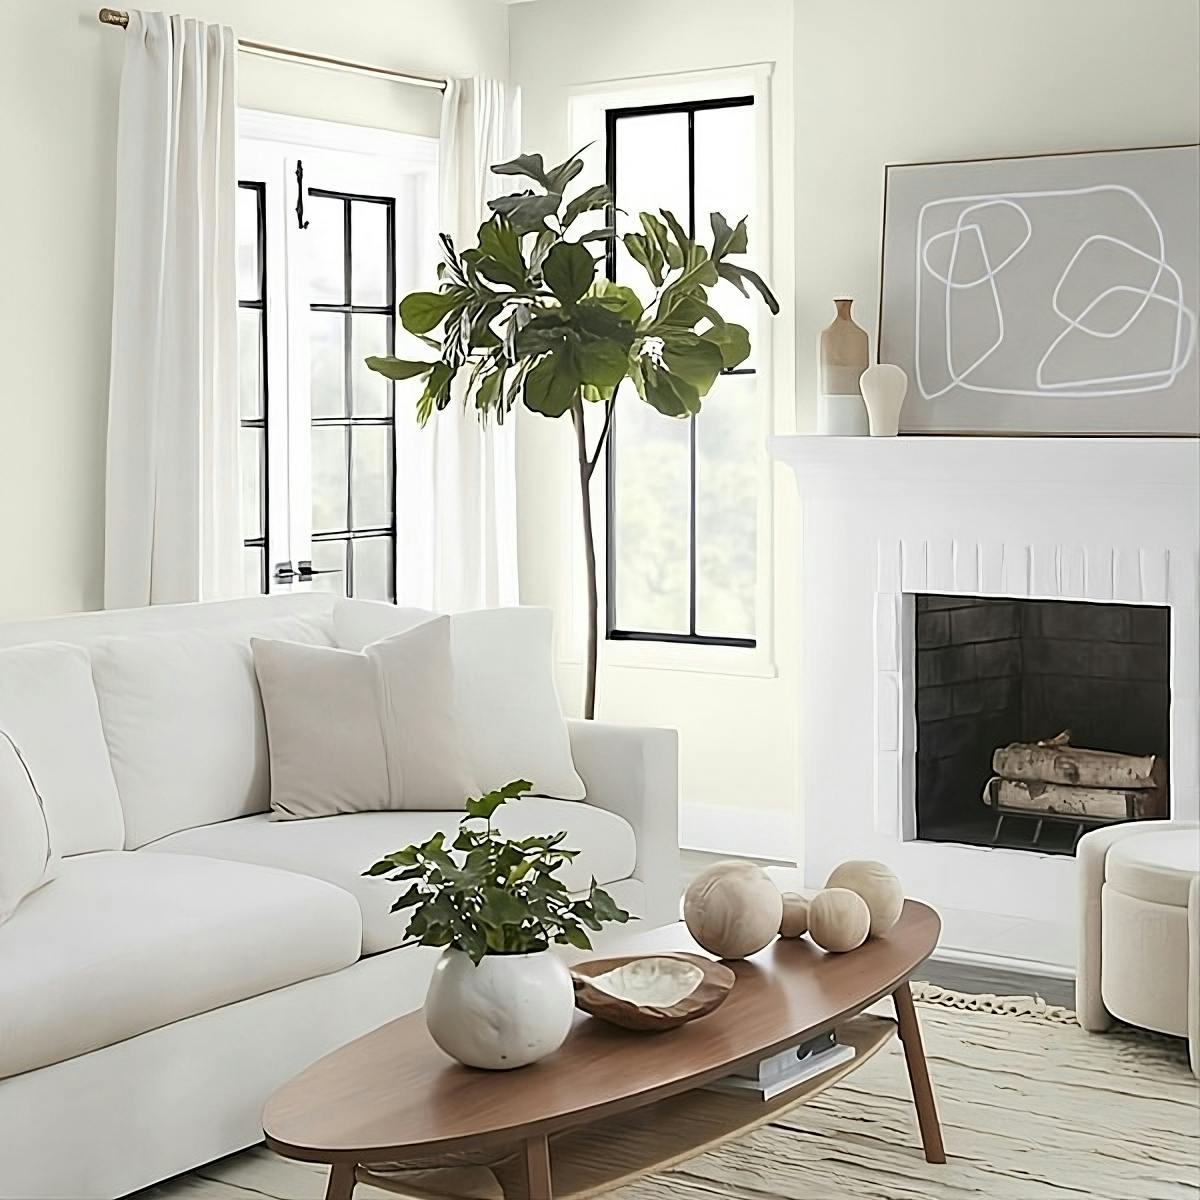 Modern living room setting with fire place, plants and neutral colors. 